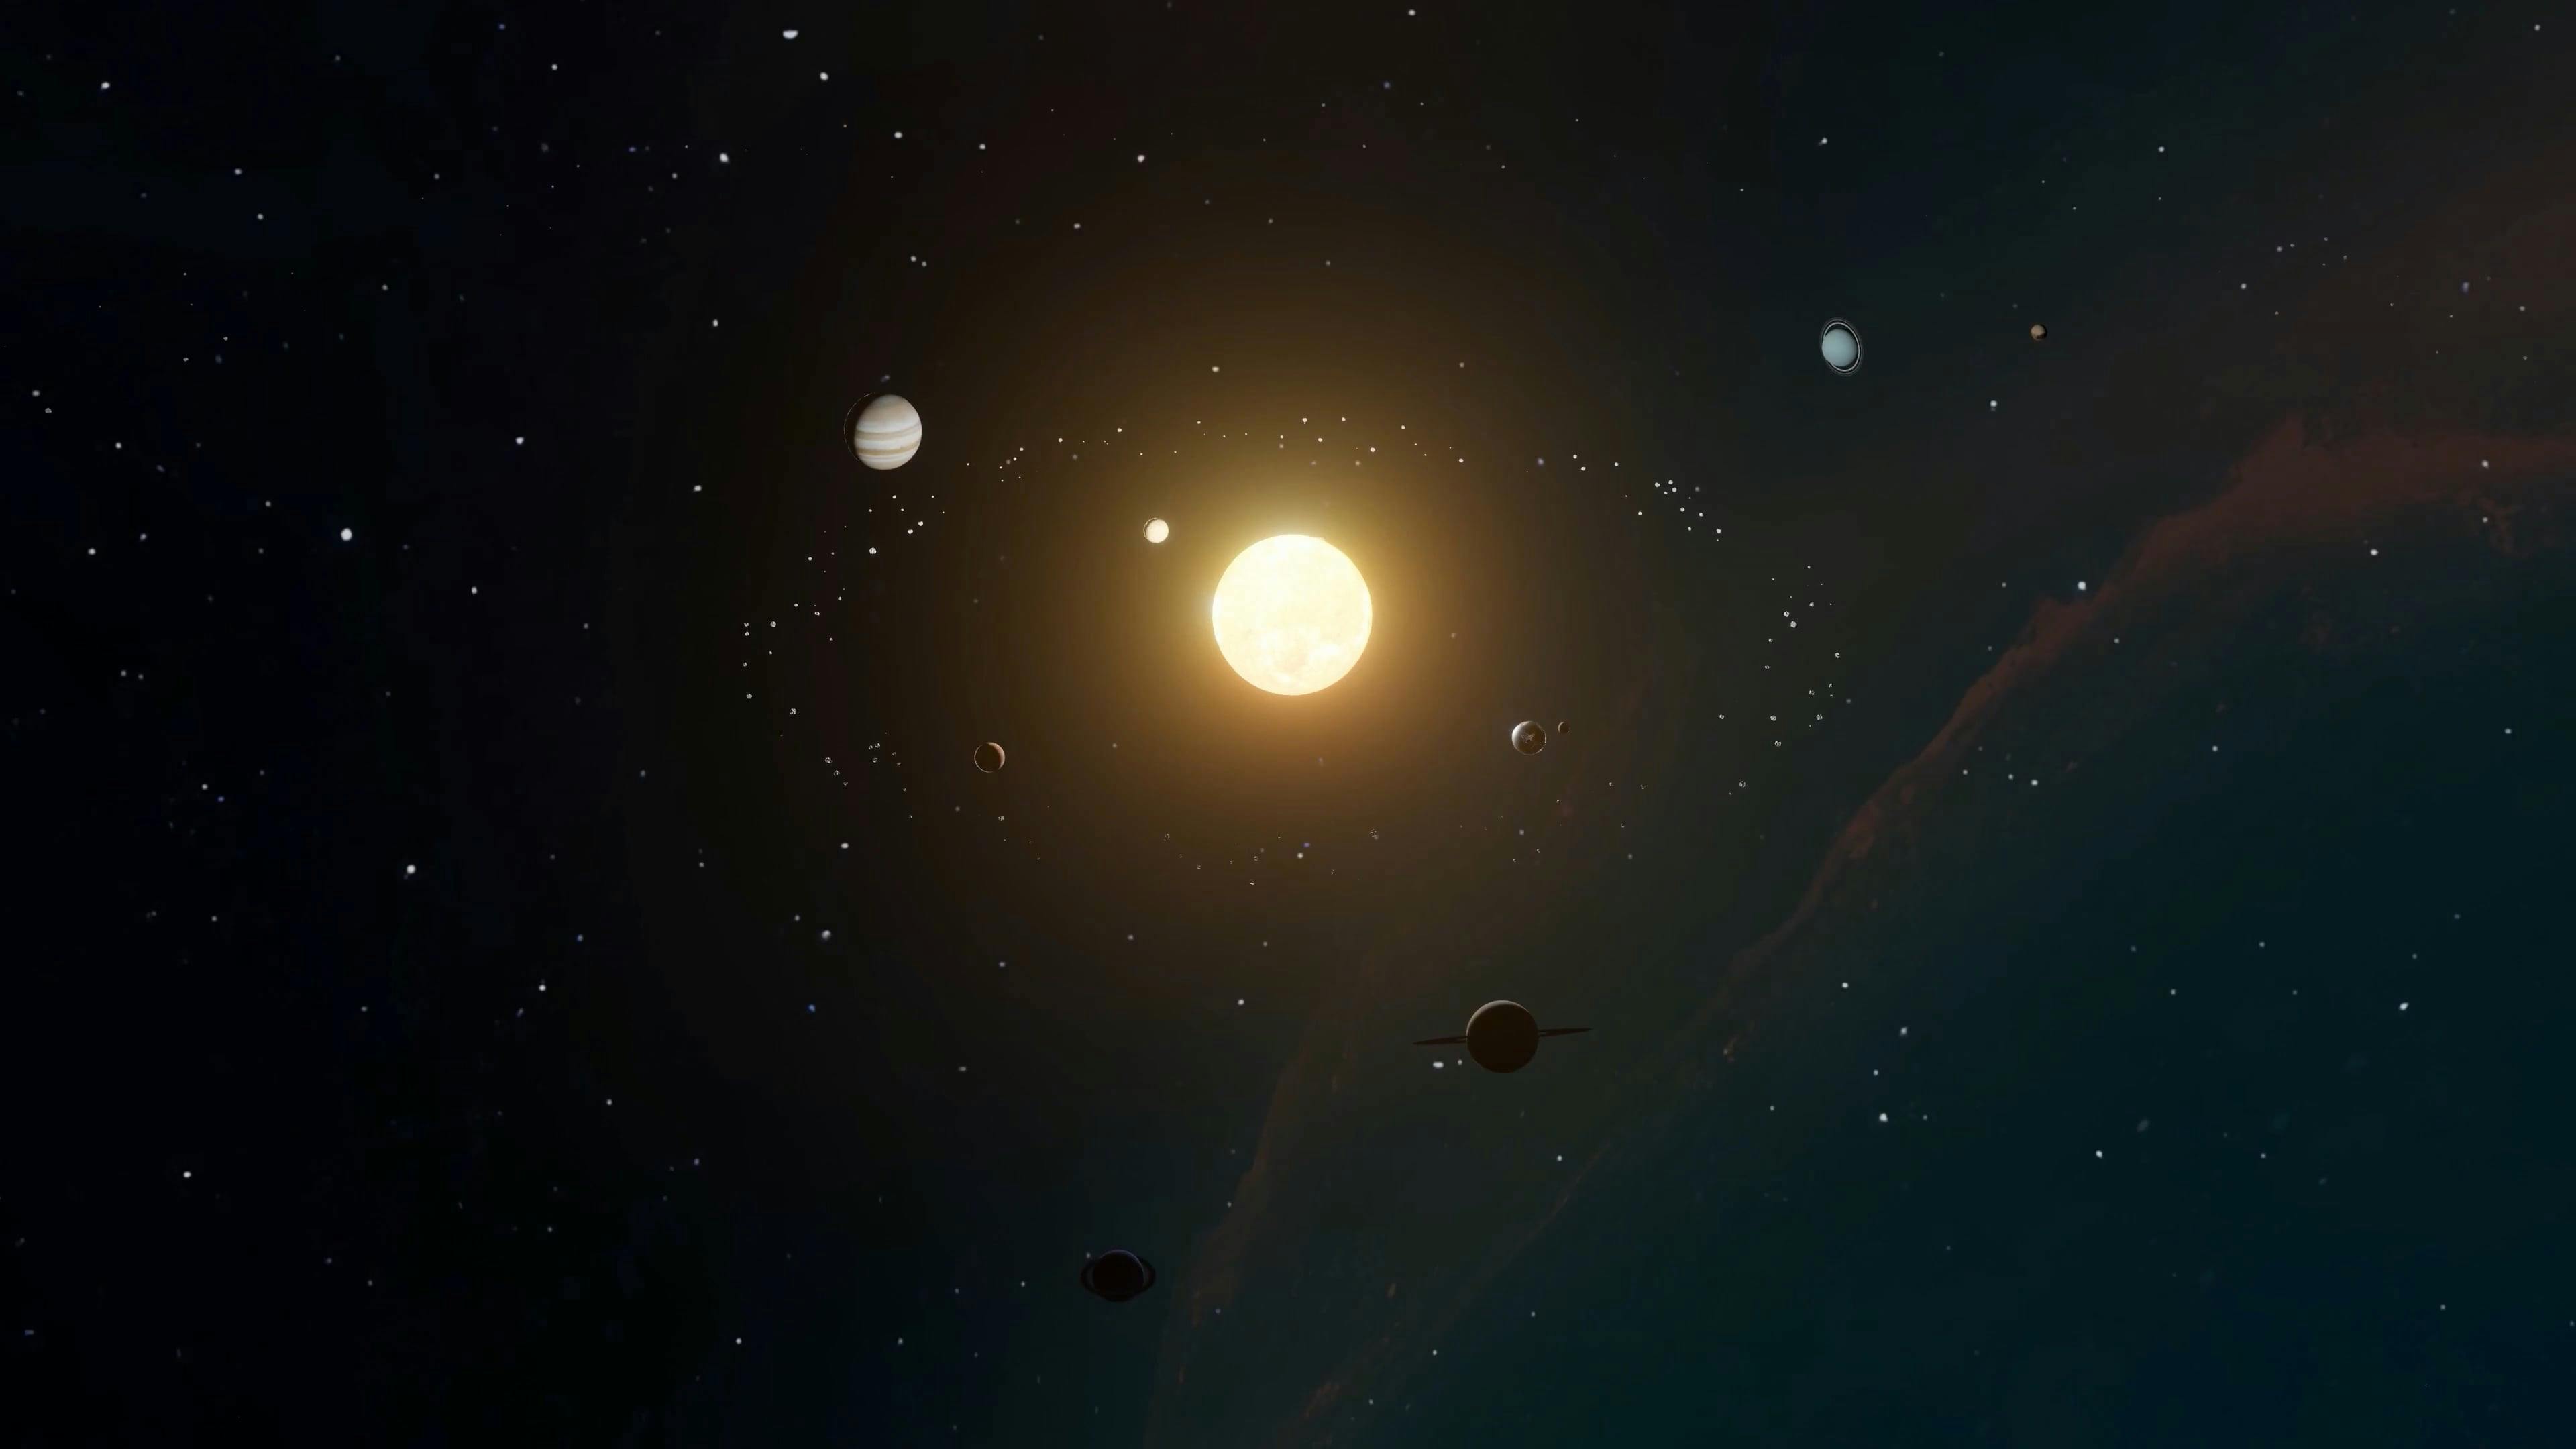 Solar System Live Wallpaper APK (Android App) - Free Download